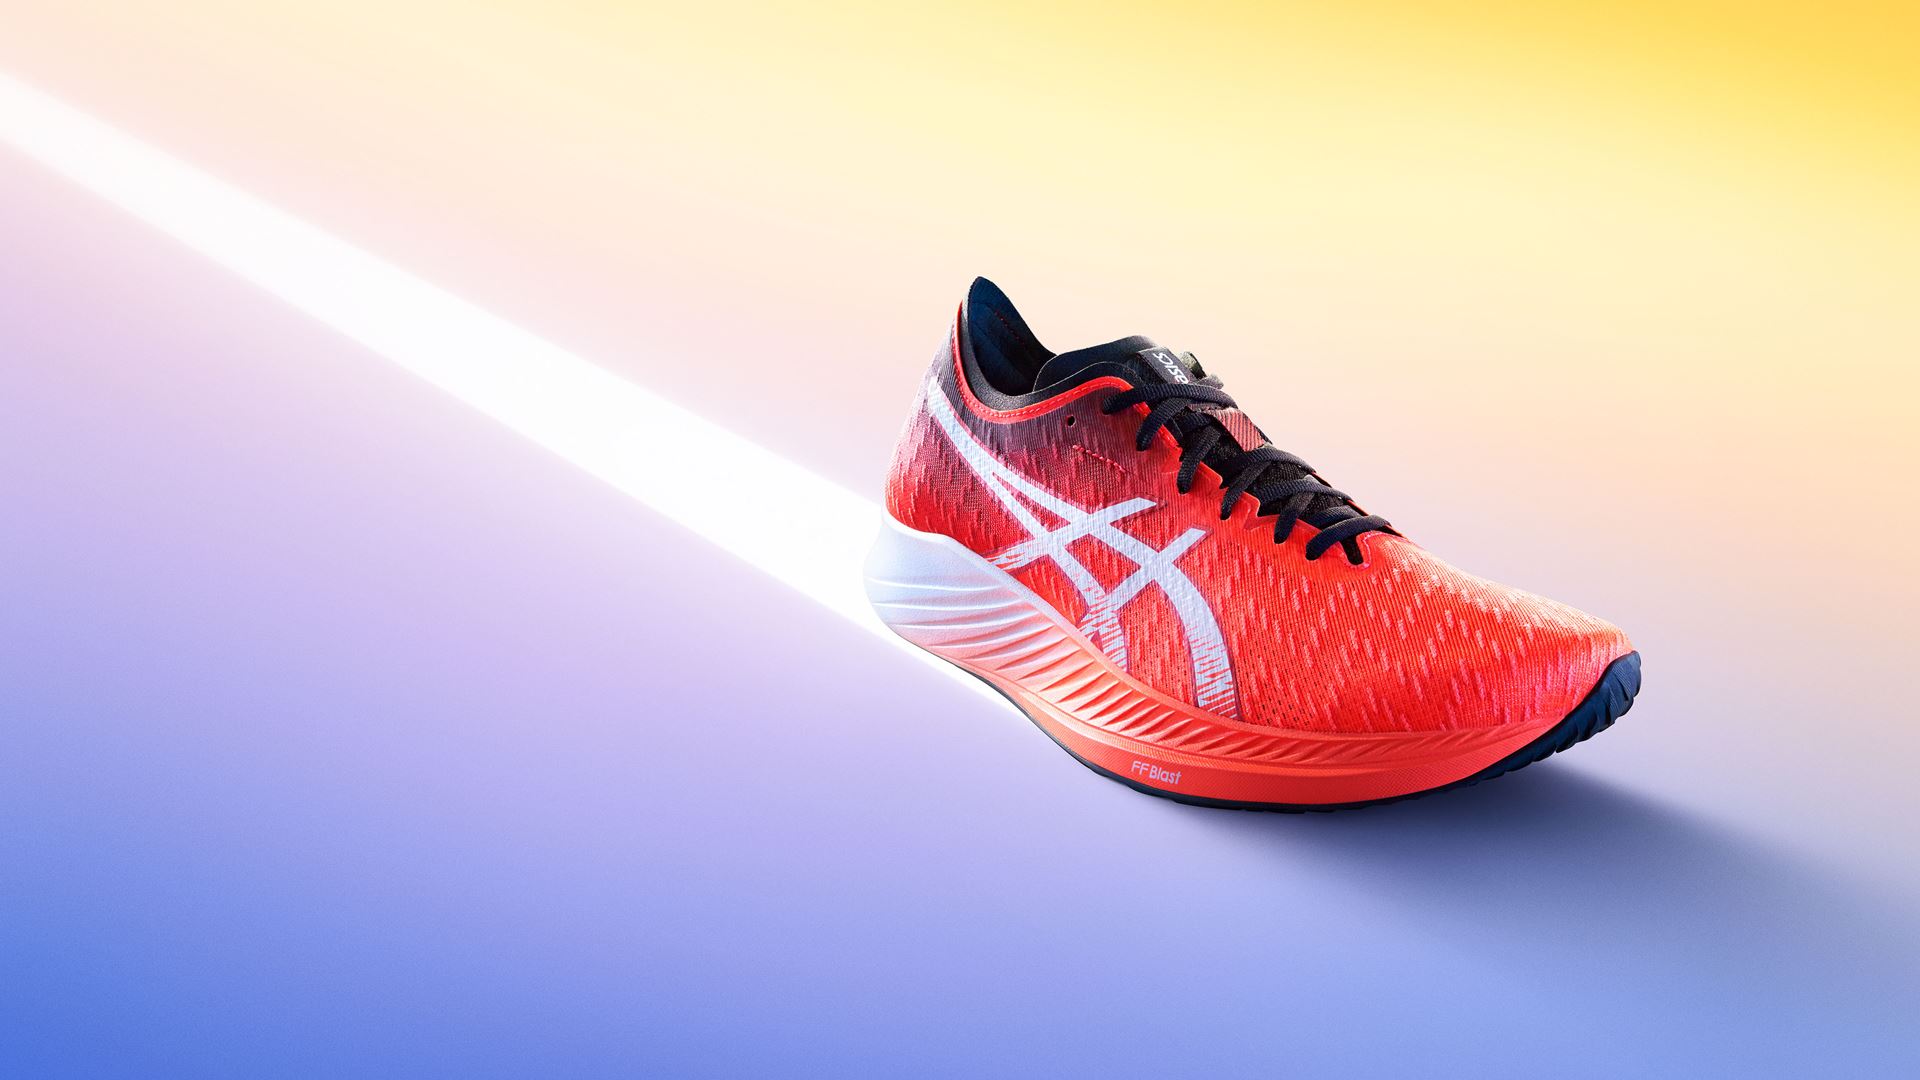 ASICS launches Magic Speed™, offering high level performance and energy efficiency to help runners go for longer and faster